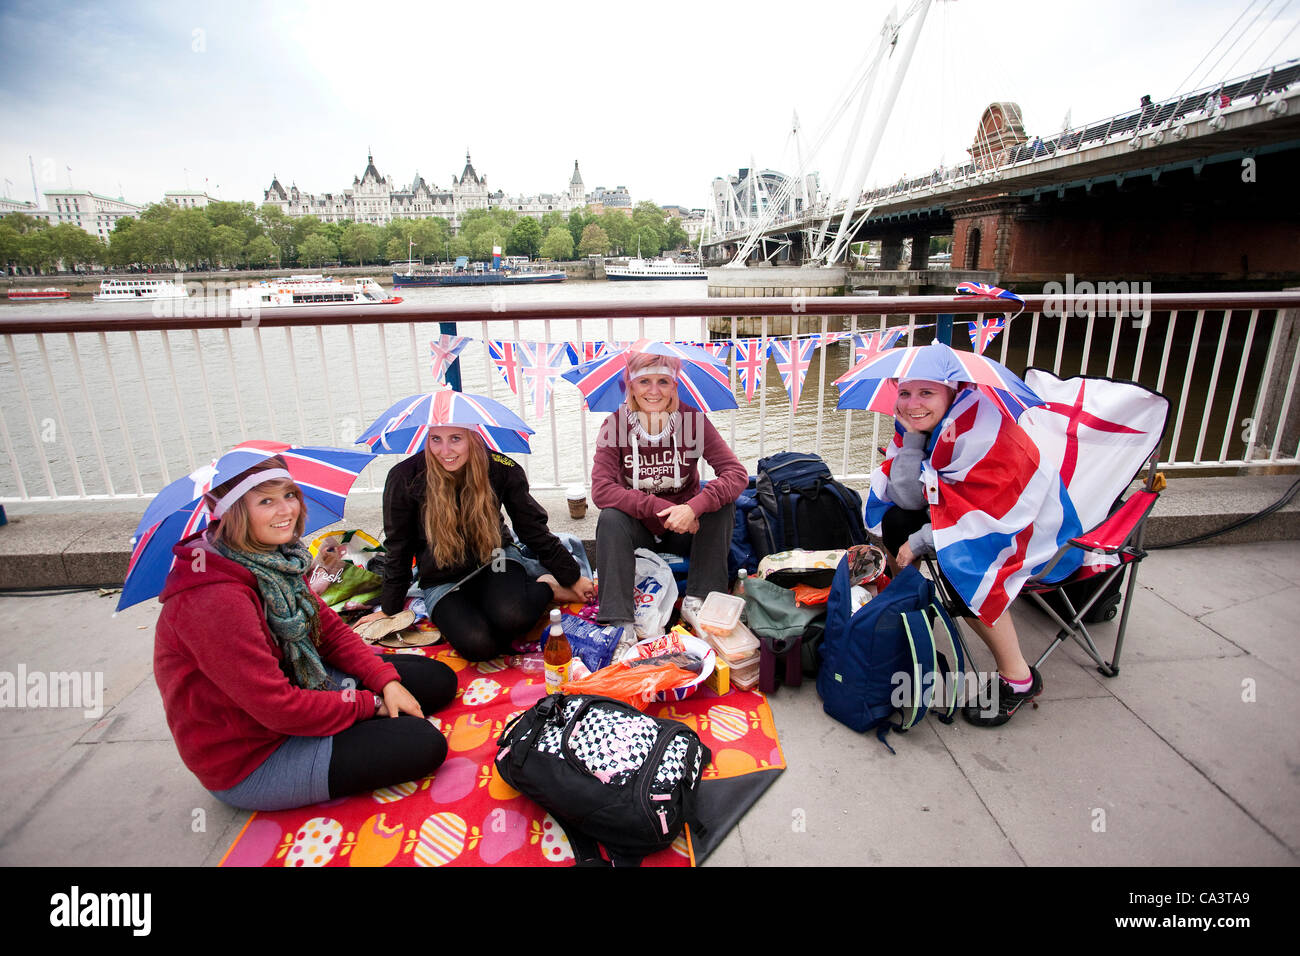 South Bank, River Thames, London, UK. 02.06.2012 Picture shows (l-r) Amy Derrick, Sophie Holmes, Lianne Holmes and Michelle Lowe from Gloucester camping overnight on the South Bank of the River Thames to guarantee a good view of the Queen's Diamond Jubilee Pageant flotilla. Stock Photo